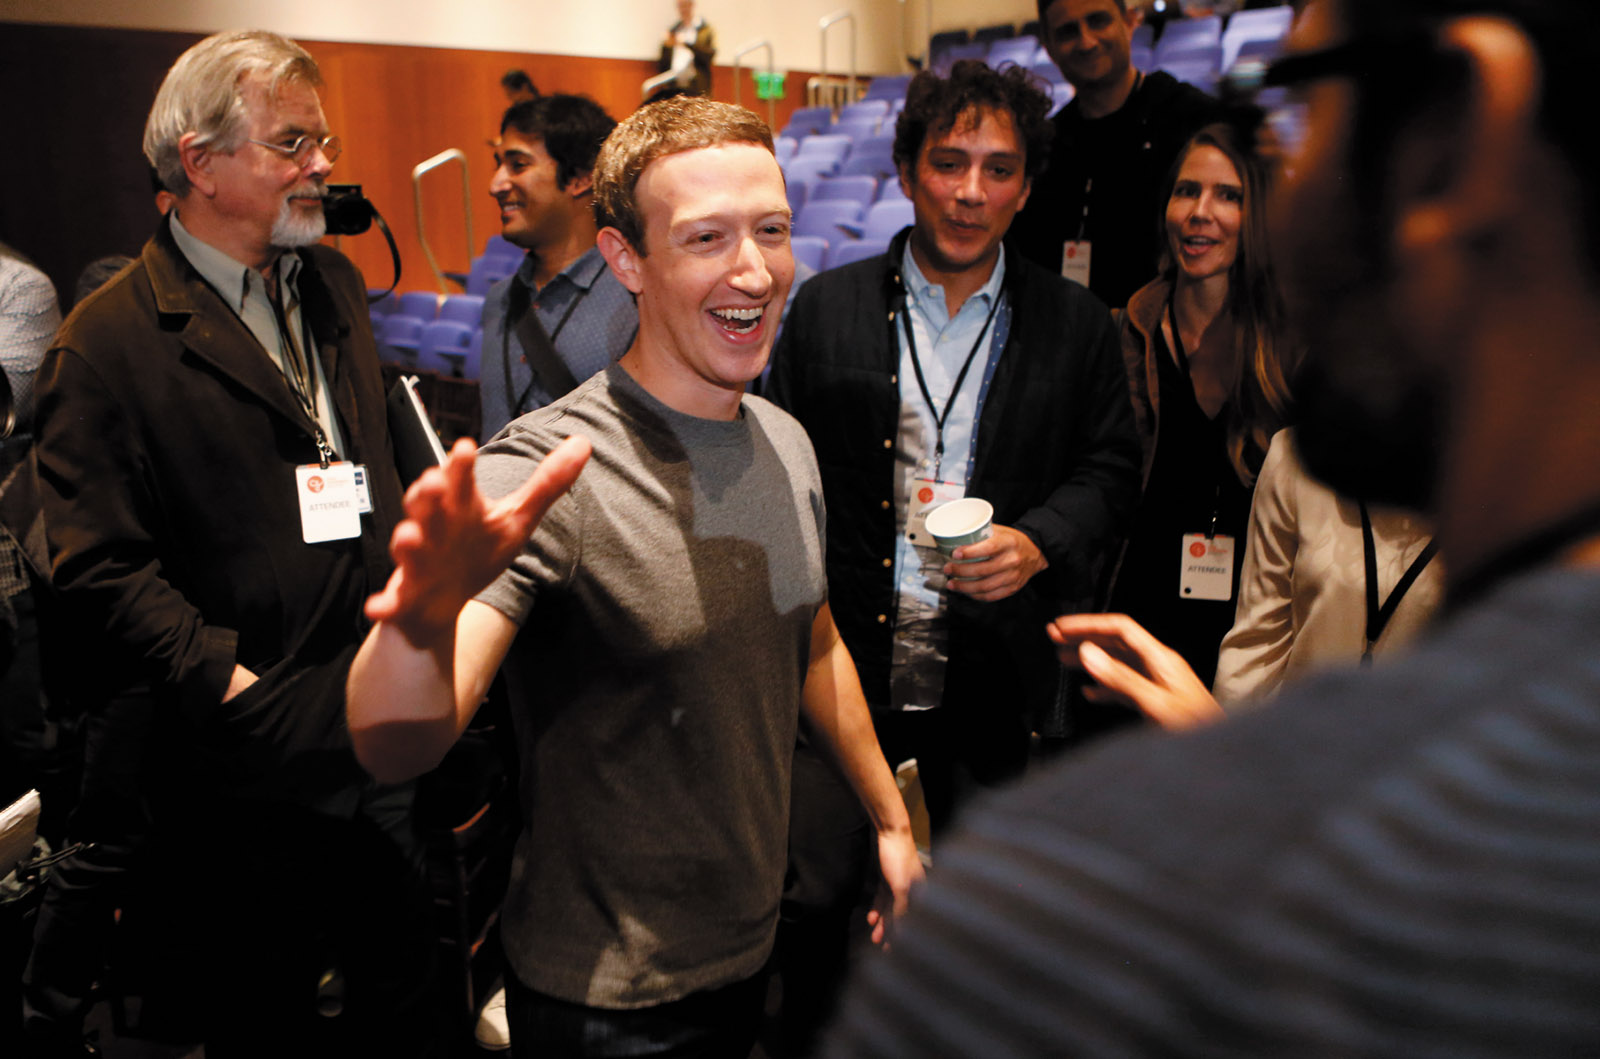 Facebook founder Mark Zuckerberg at the announcement of the Chan Zuckerberg Initiative to ‘cure, prevent, or manage all disease’ by the end of the century, San Francisco, September 2016